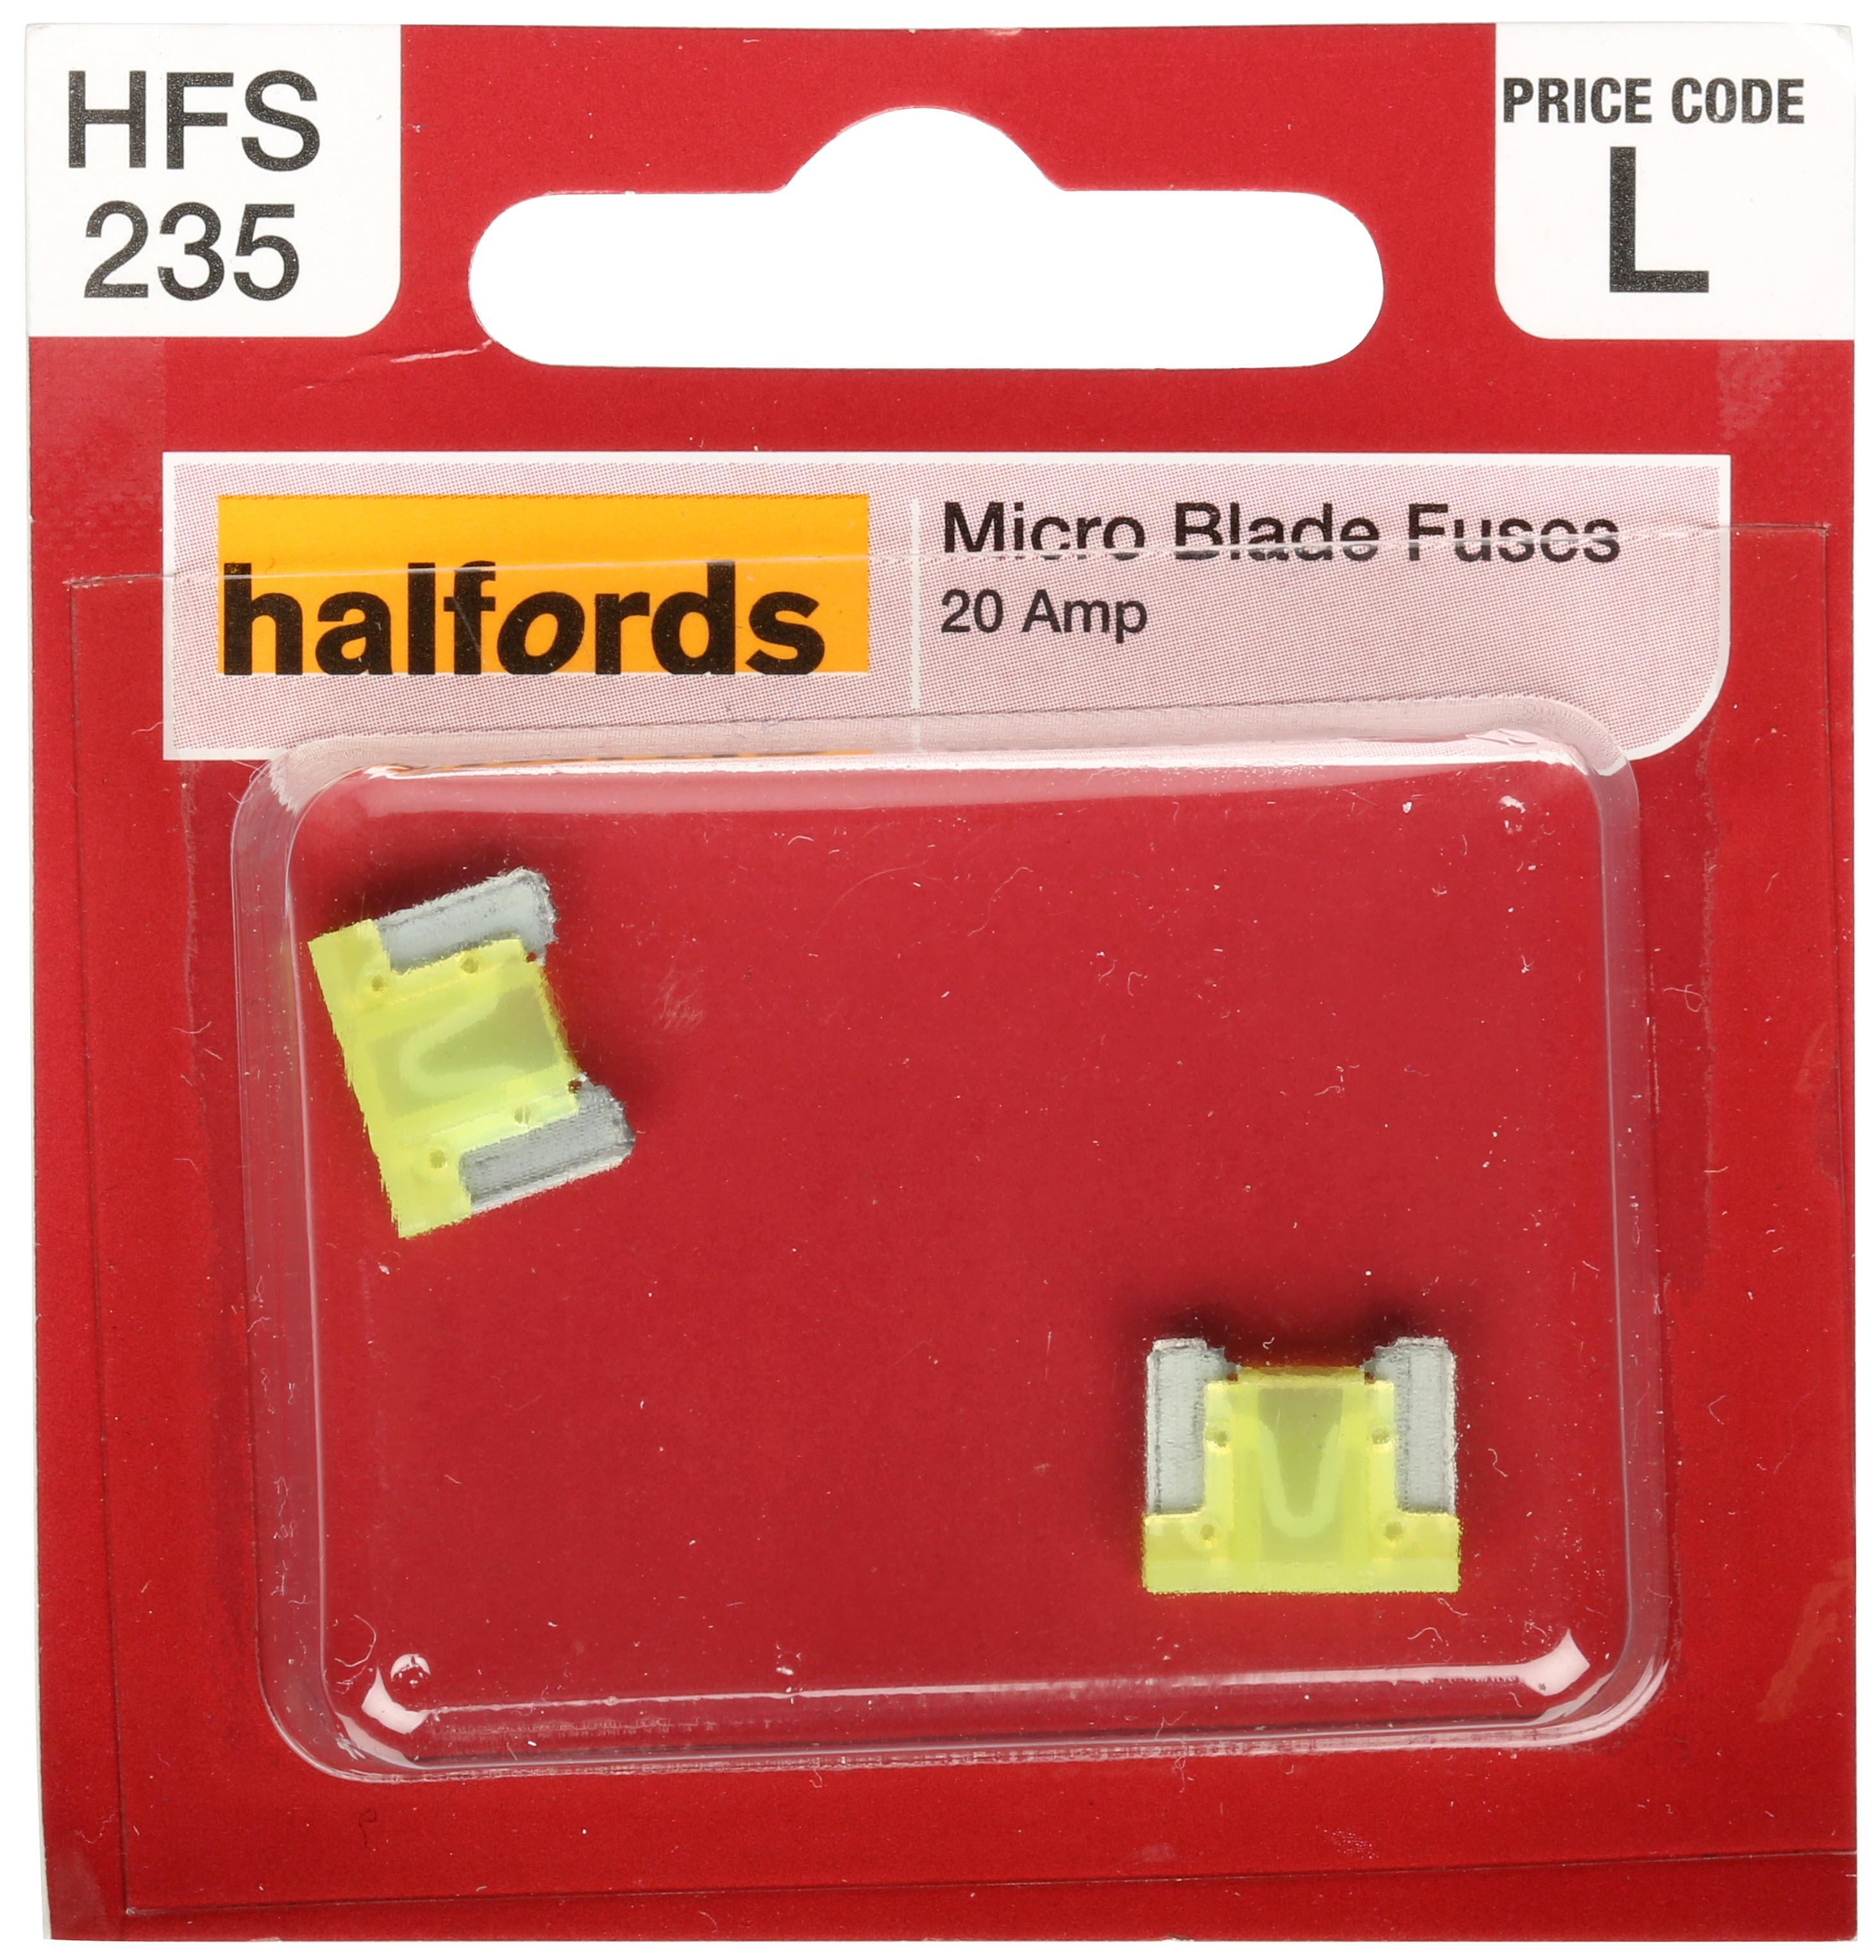 Halfords Micro Blade Fuse 20 Amp (Hfs235)